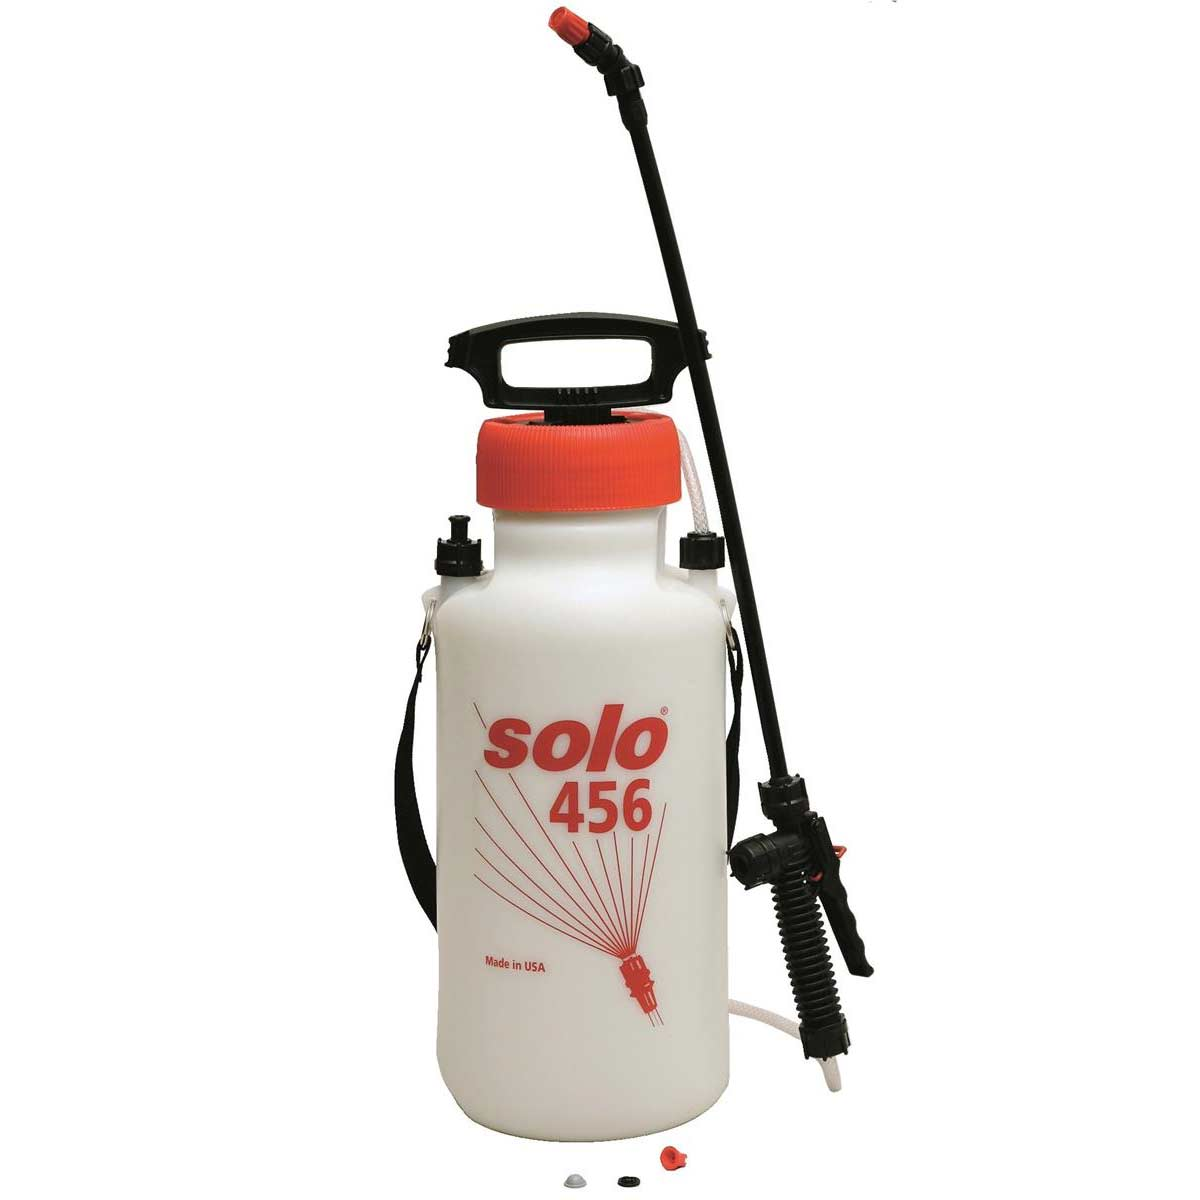 2.25-gal. Handheld Sprayer from Solo